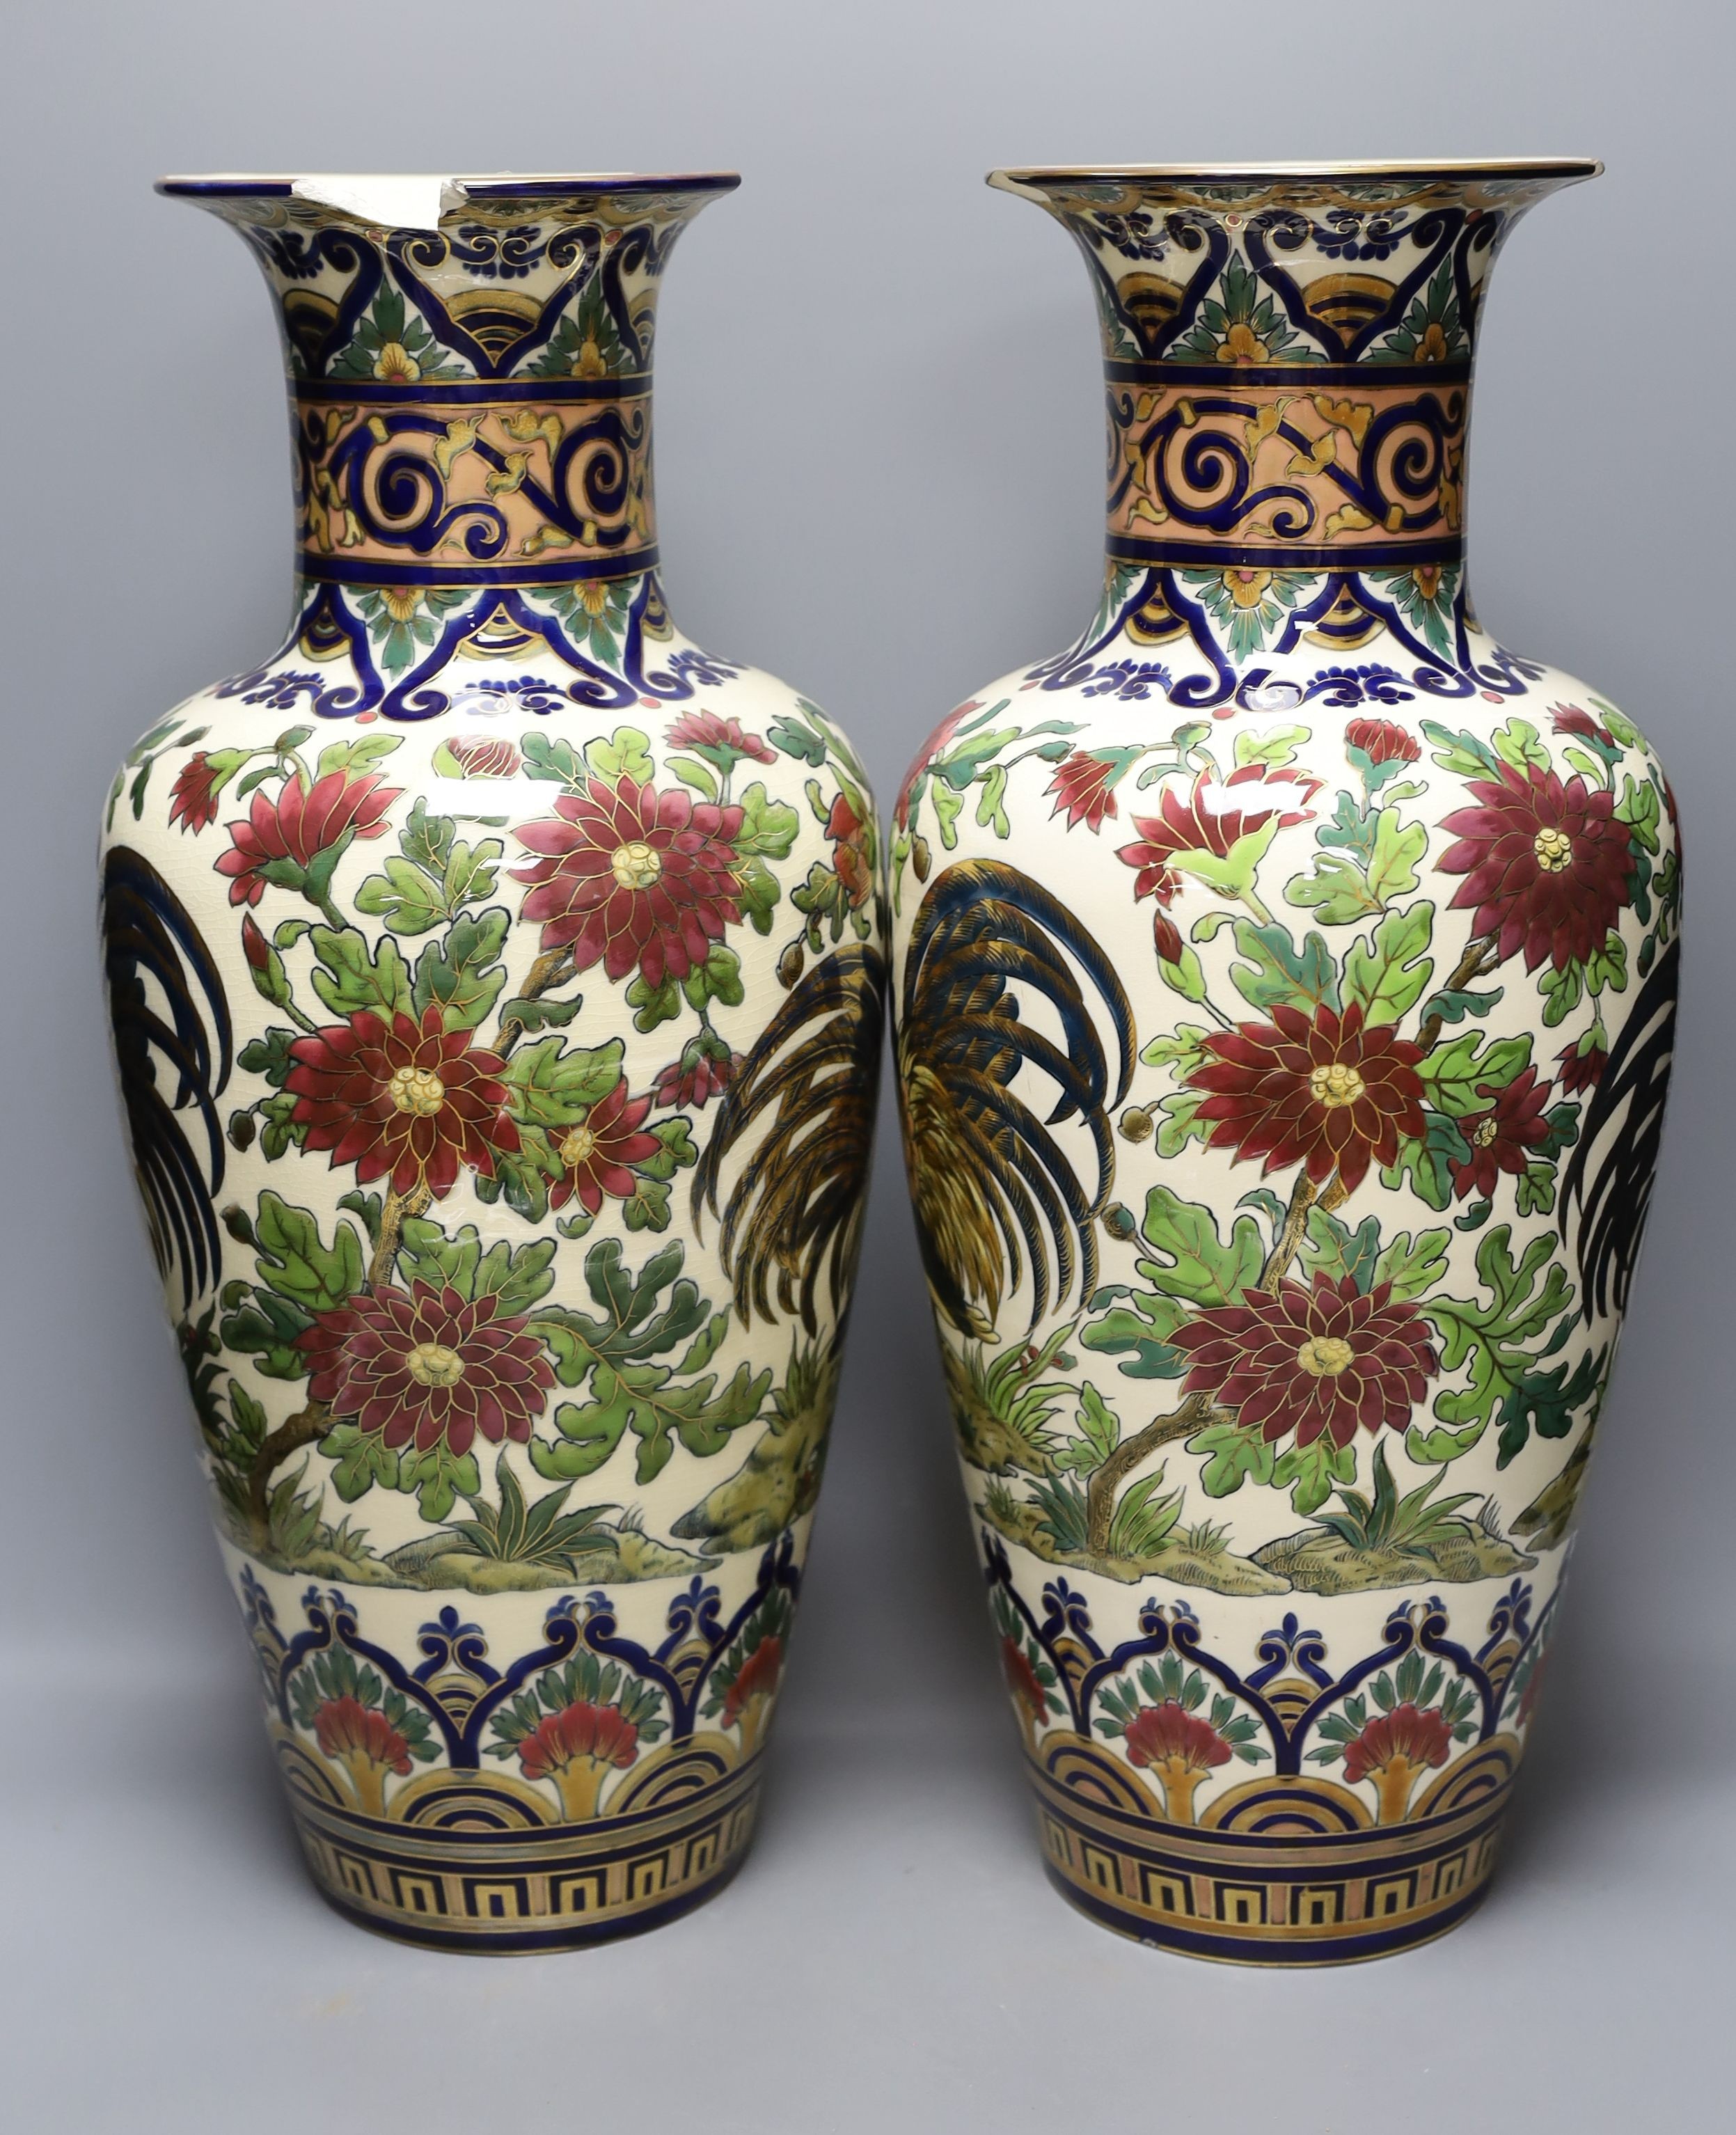 A large pair of Zsolnay Pecs vases - 50.5cm tall